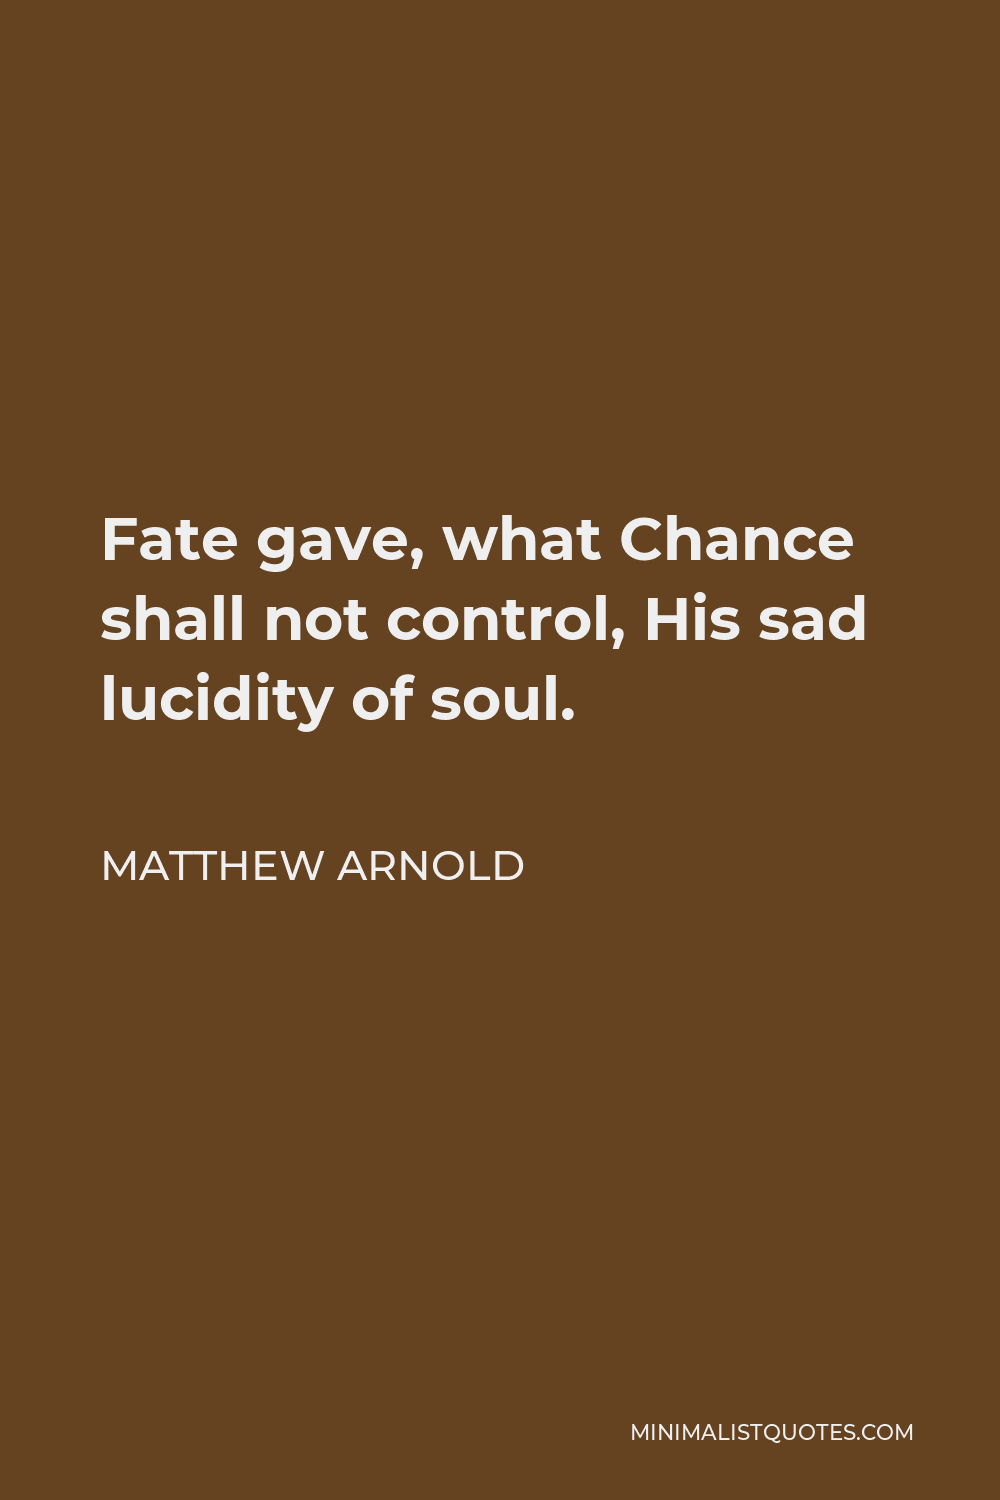 Matthew Arnold Quote - Fate gave, what Chance shall not control, His sad lucidity of soul.